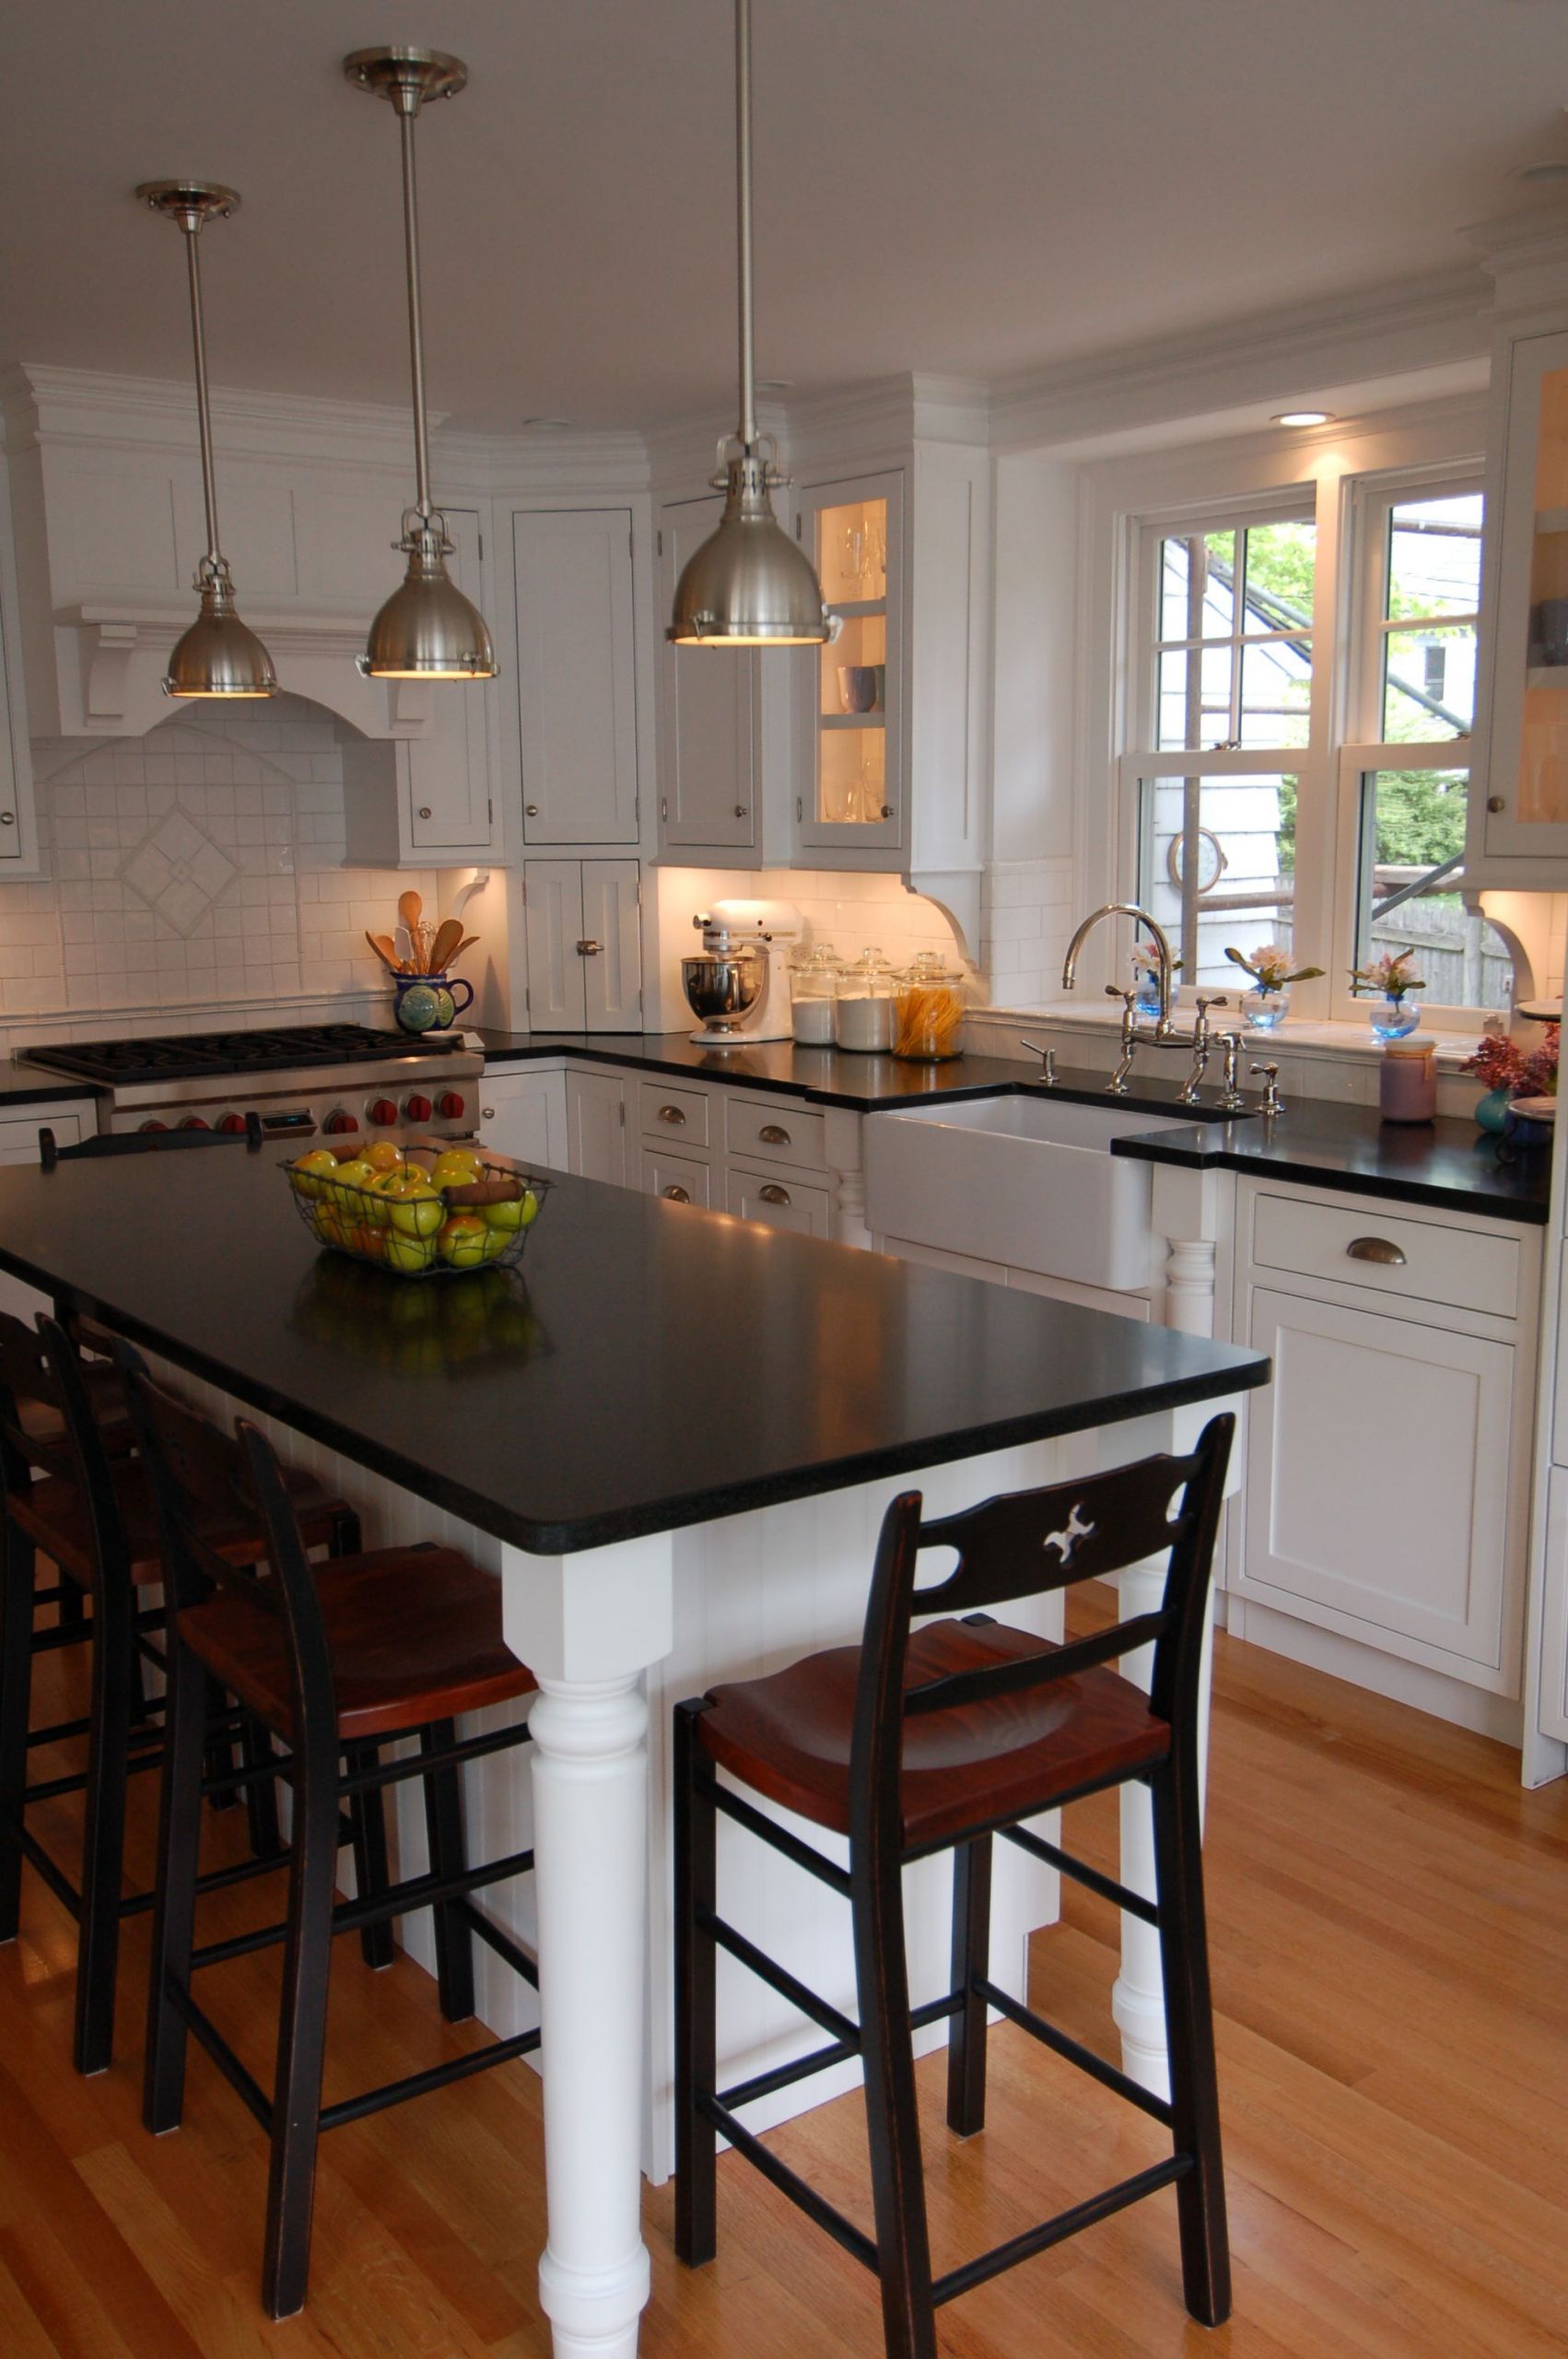 Center Island For Small Kitchen
 Sink and stove location with Island and lamps perfect